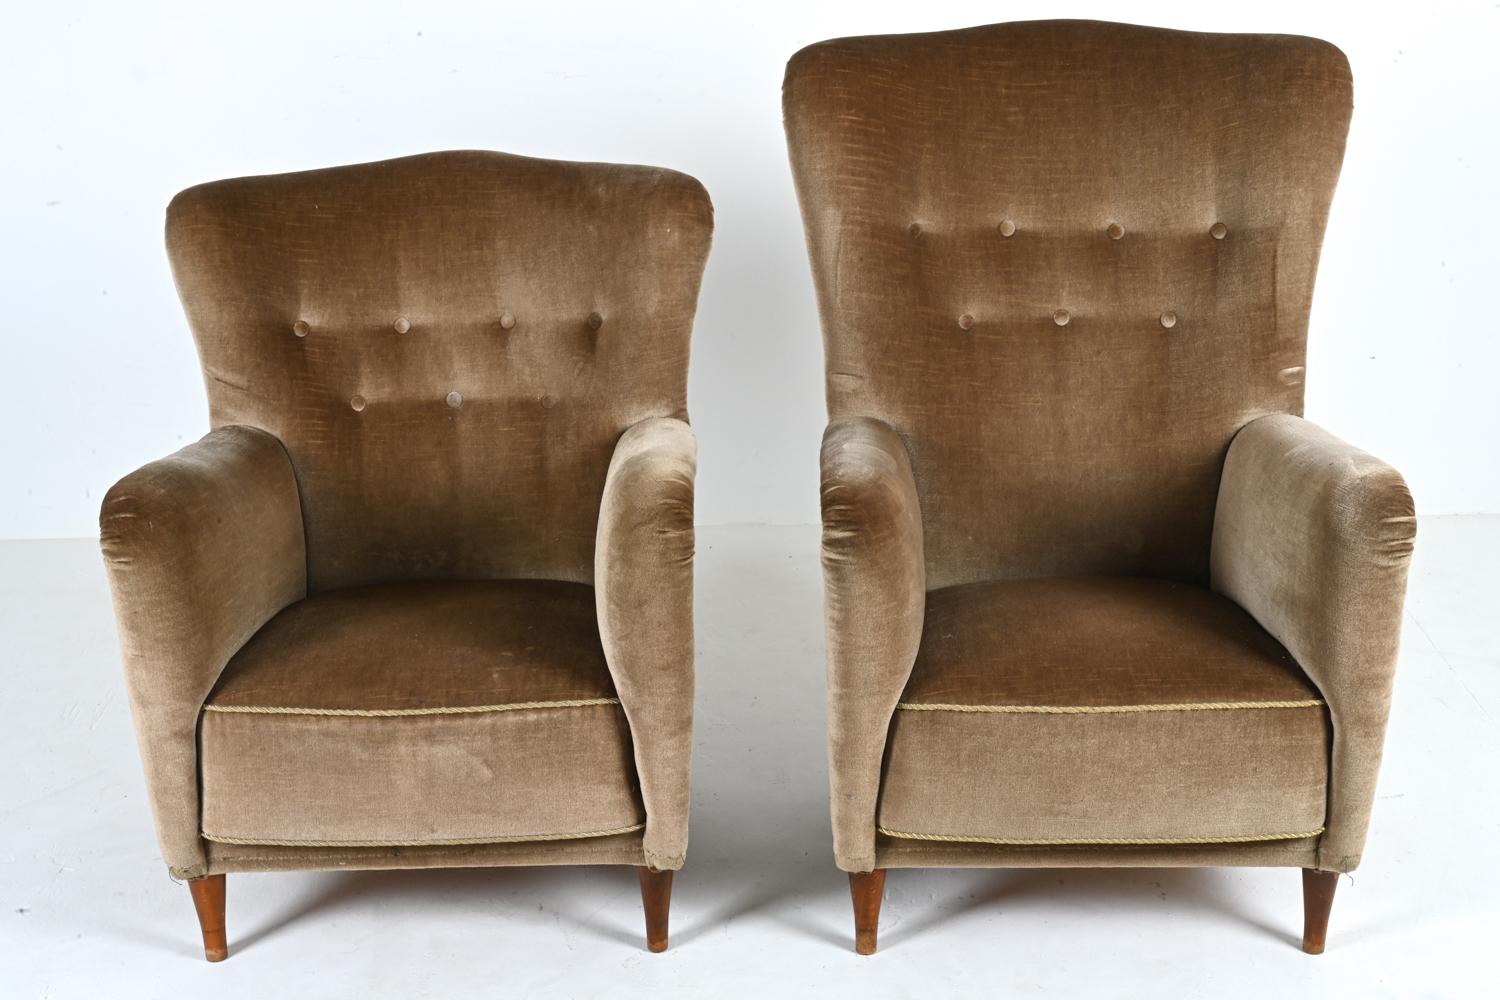 Two Danish Easy Chairs, Manner of Frits Henningsen, c. 1950's In Good Condition For Sale In Norwalk, CT